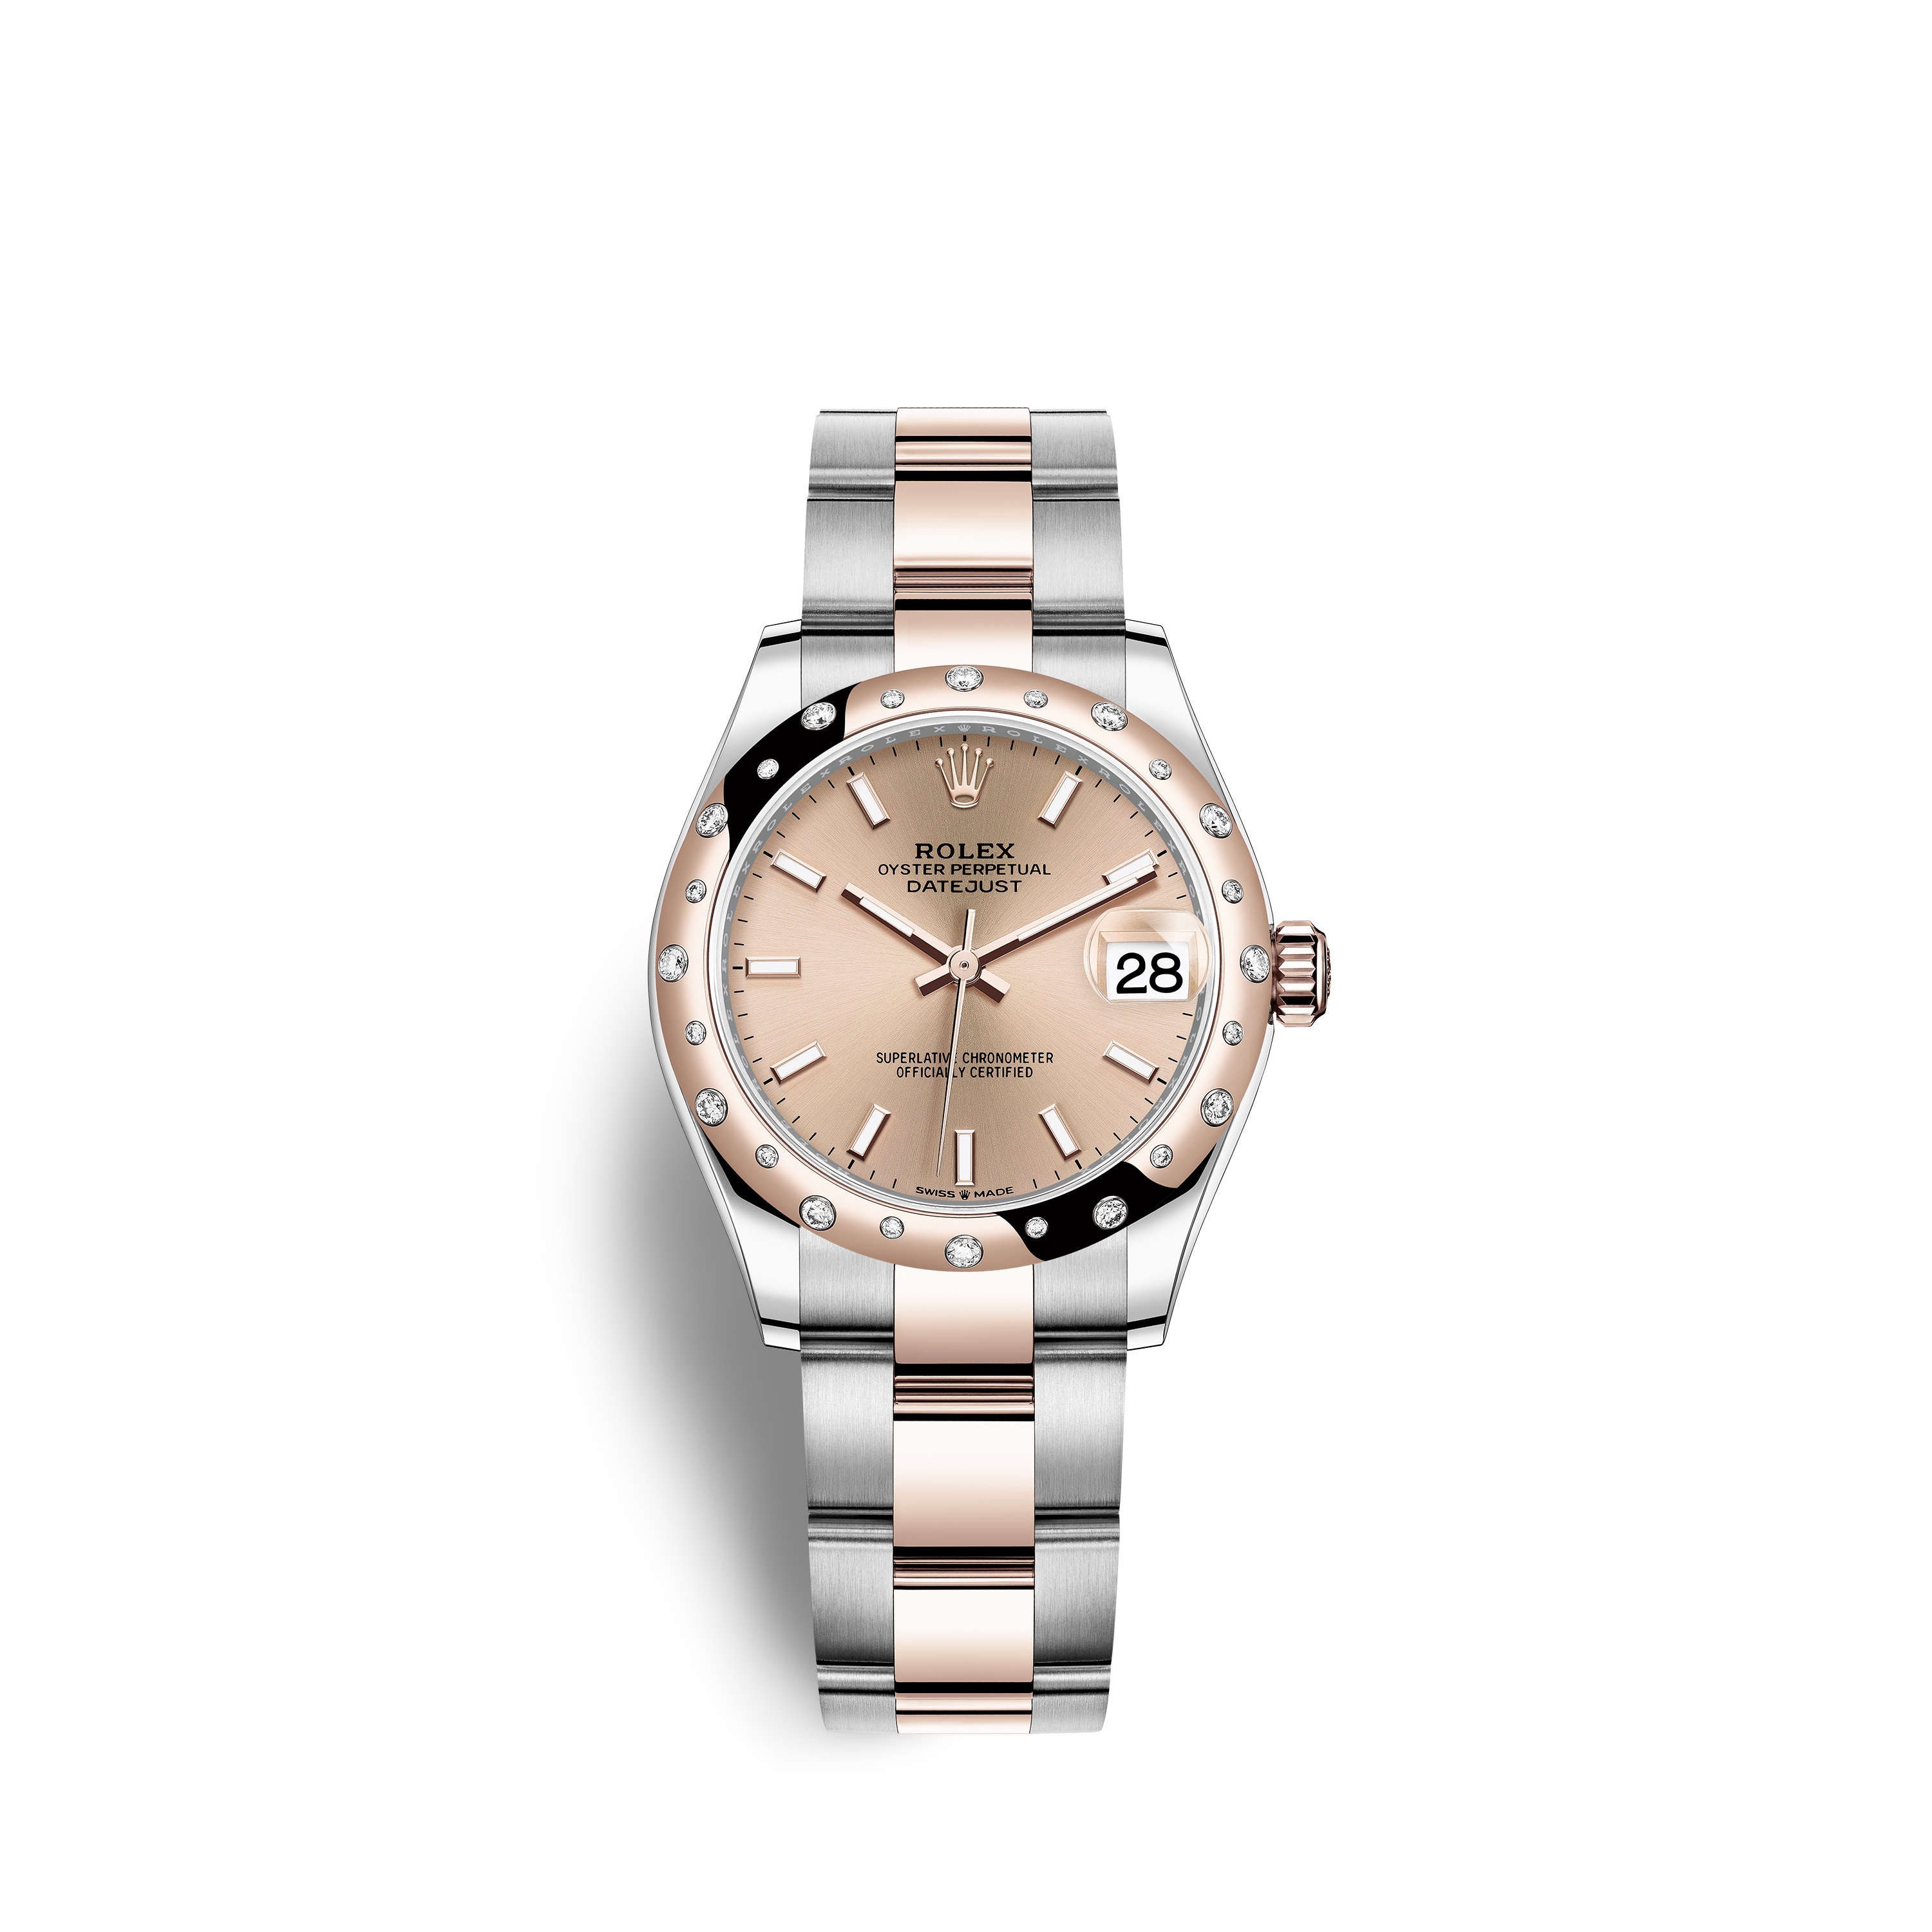 Datejust 31 278341RBR Rose Gold, Stainless Steel & Diamonds Watch (Rosé Colour)